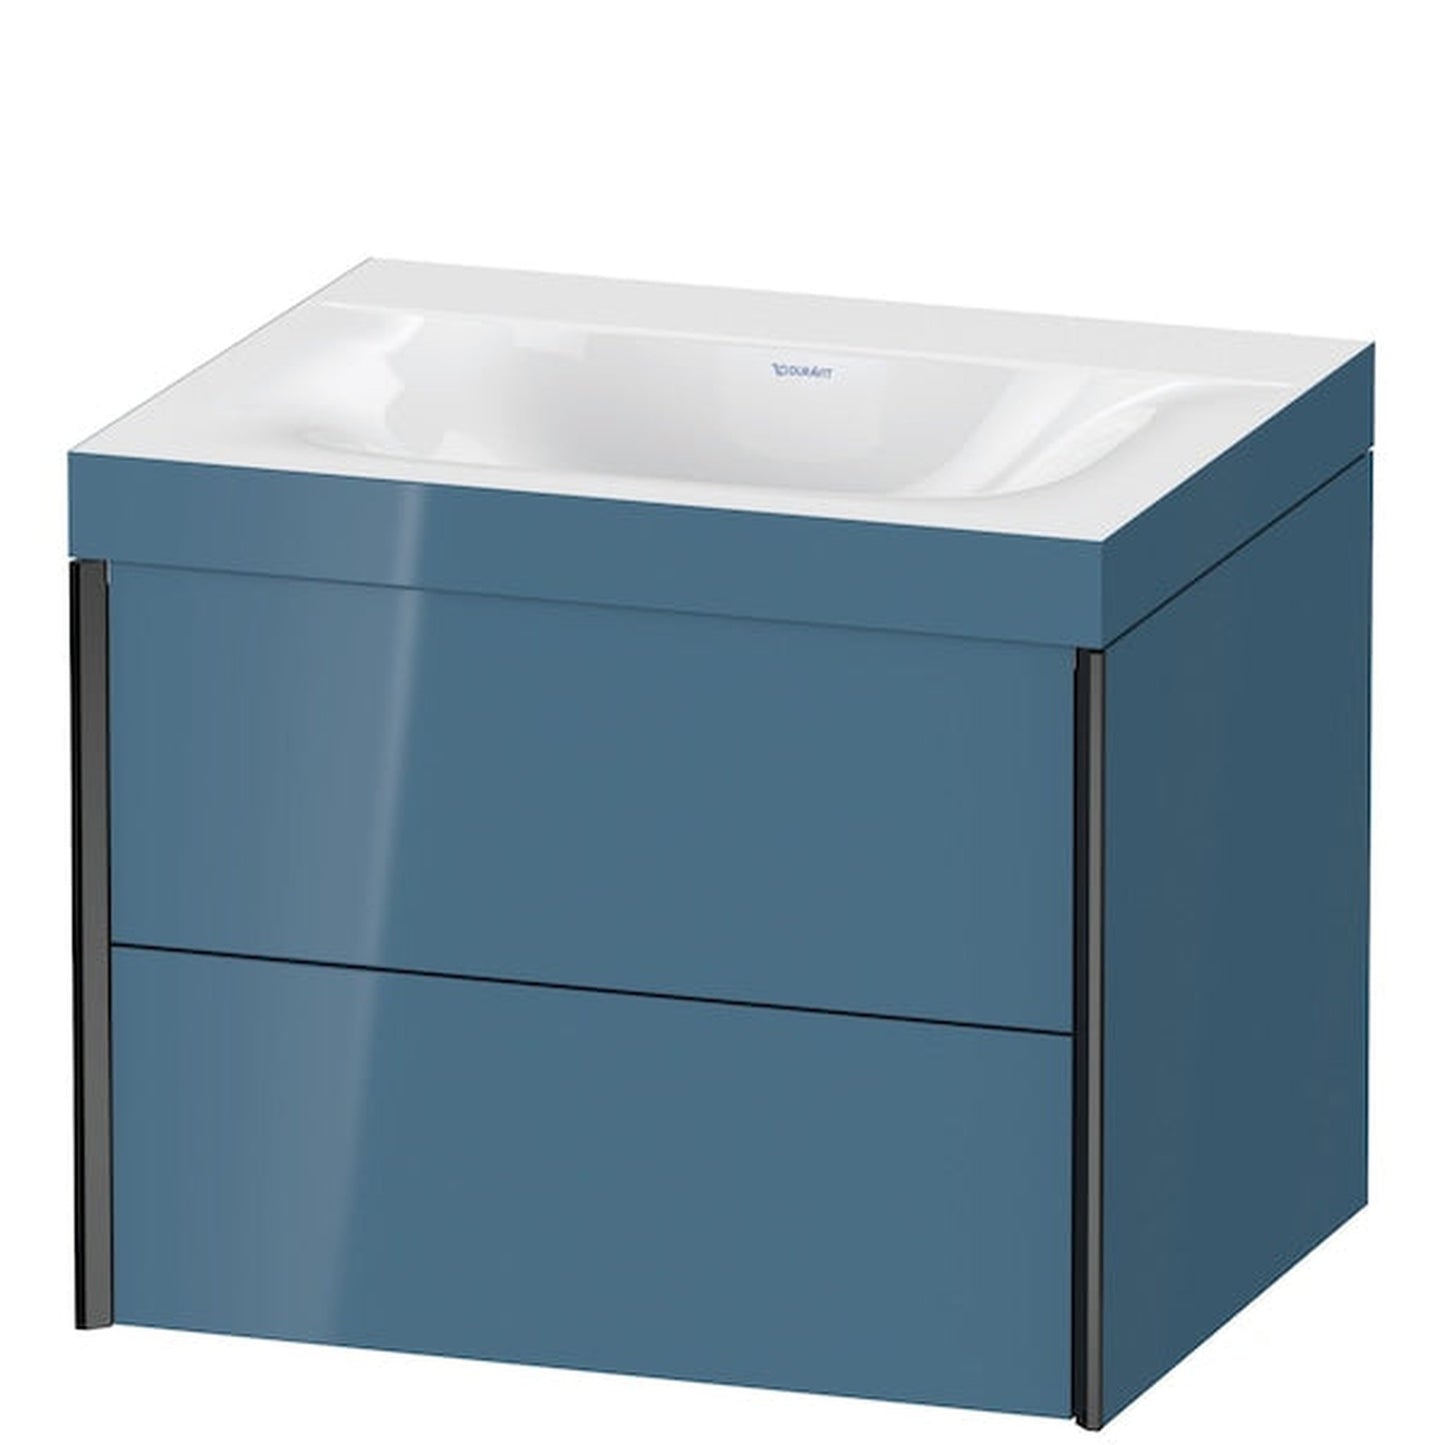 Duravit Xviu 24" x 20" x 19" Two Drawer C-Bonded Wall-Mount Vanity Kit Without Tap Hole, Stone Blue (XV4614NB247C)